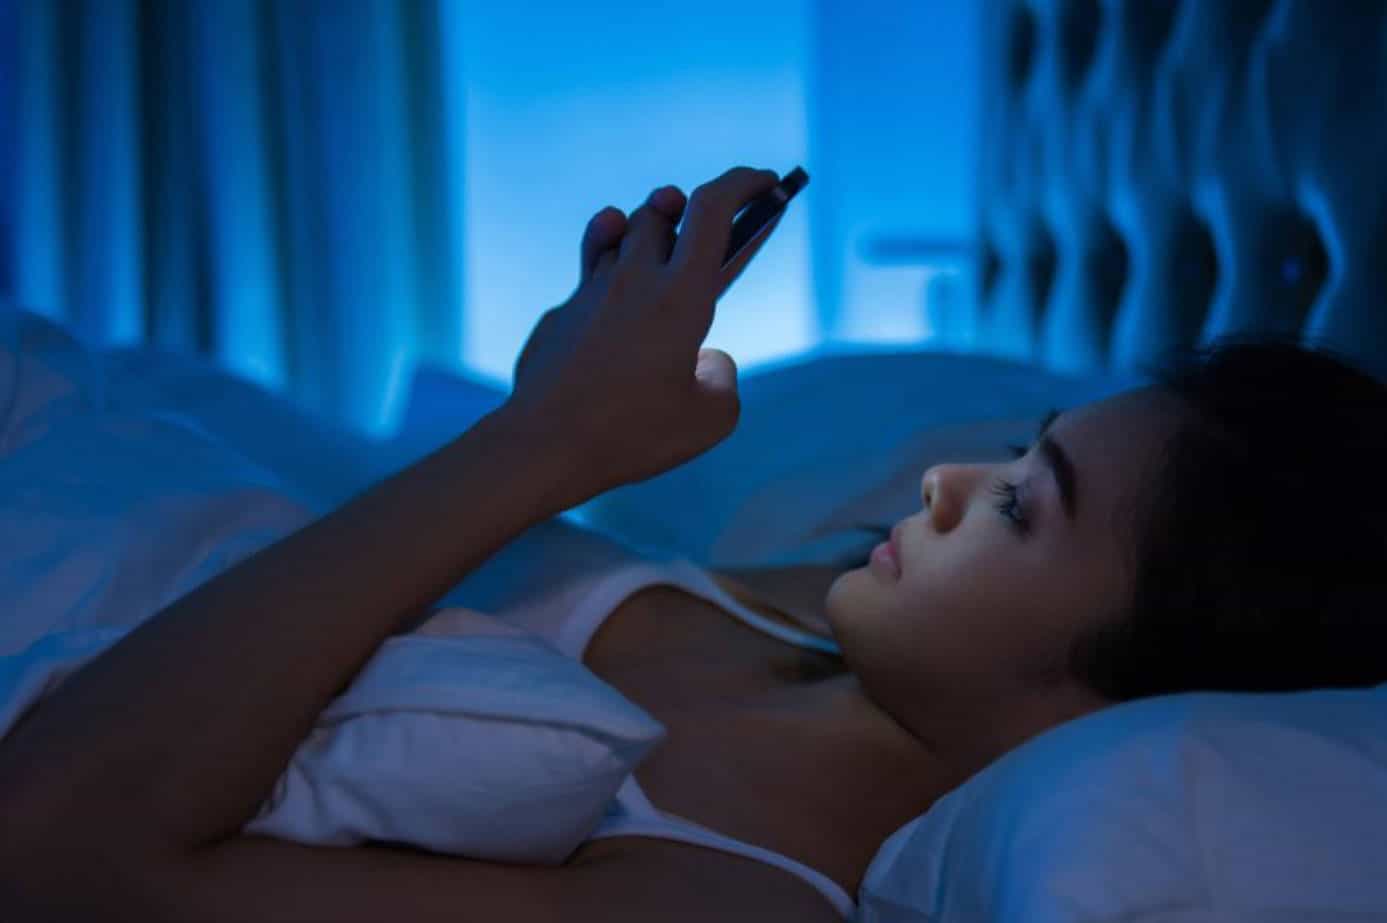 what led light color is best for sleeping